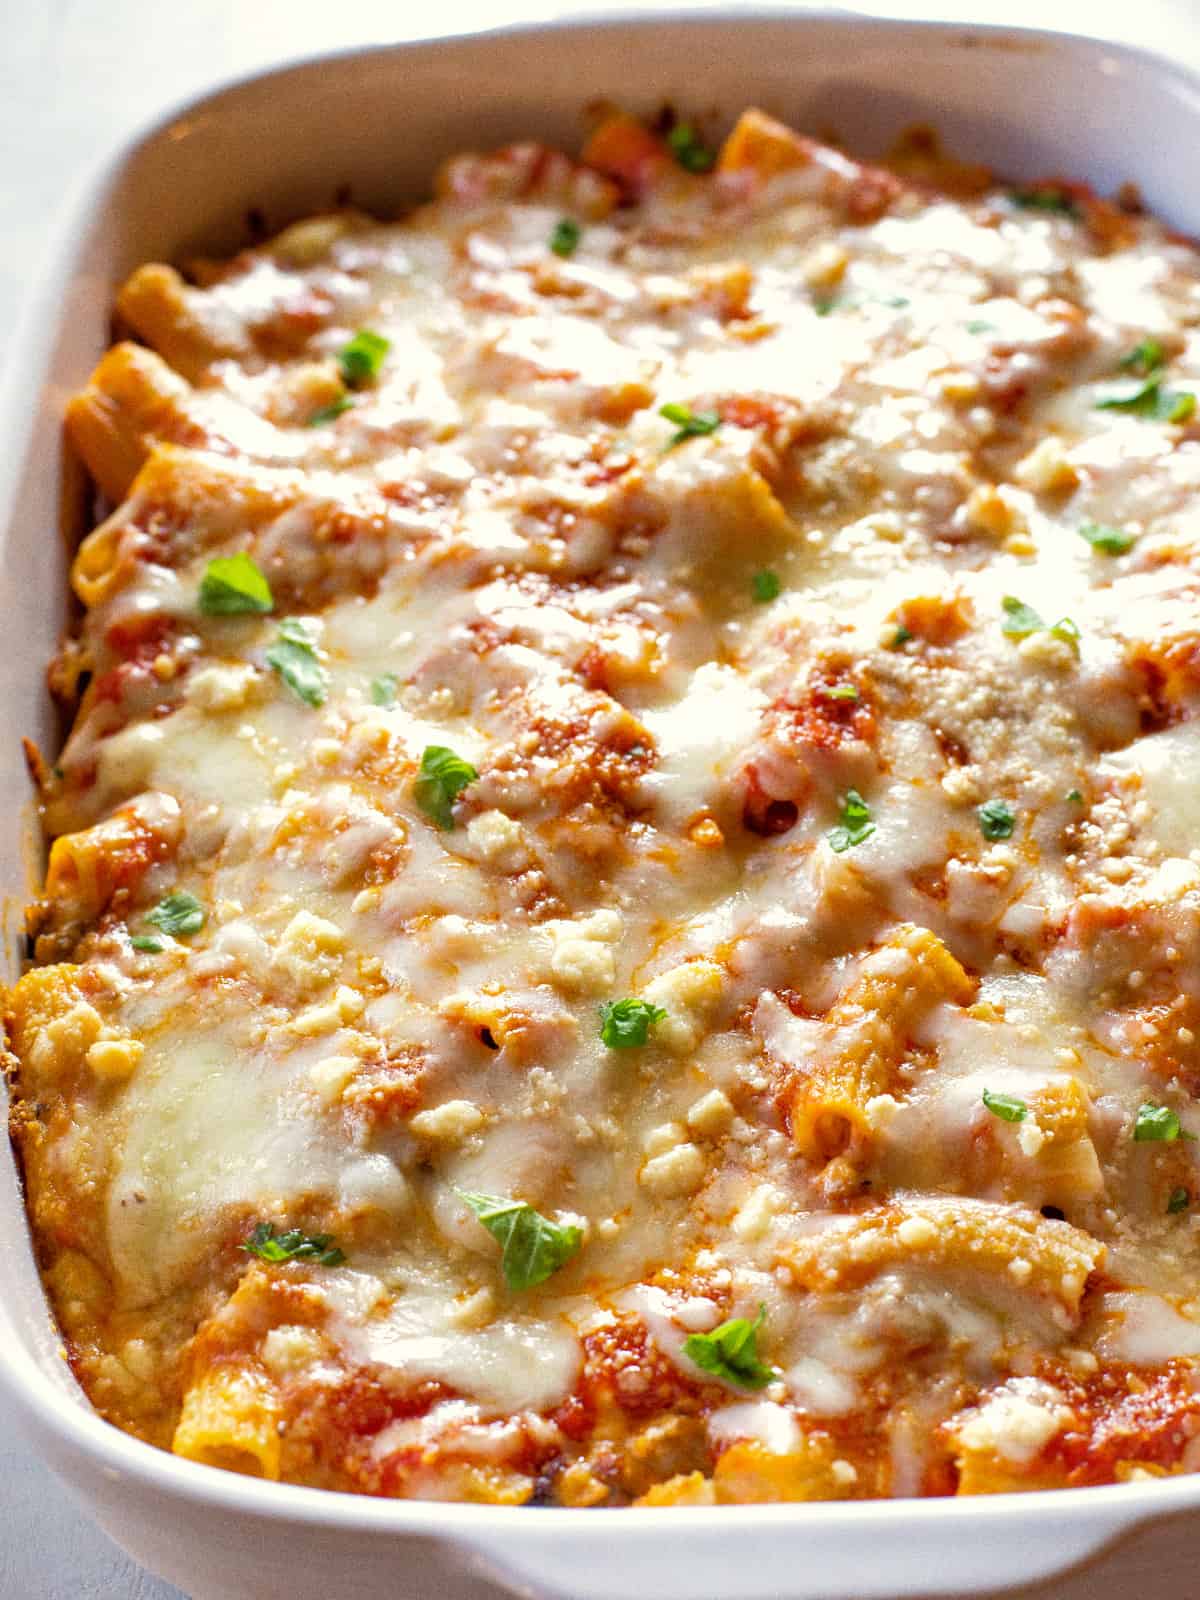 Easier Than Pioneer Woman Baked Ziti: Slow Cooker Baked Ziti - Fresh Mommy  Blog